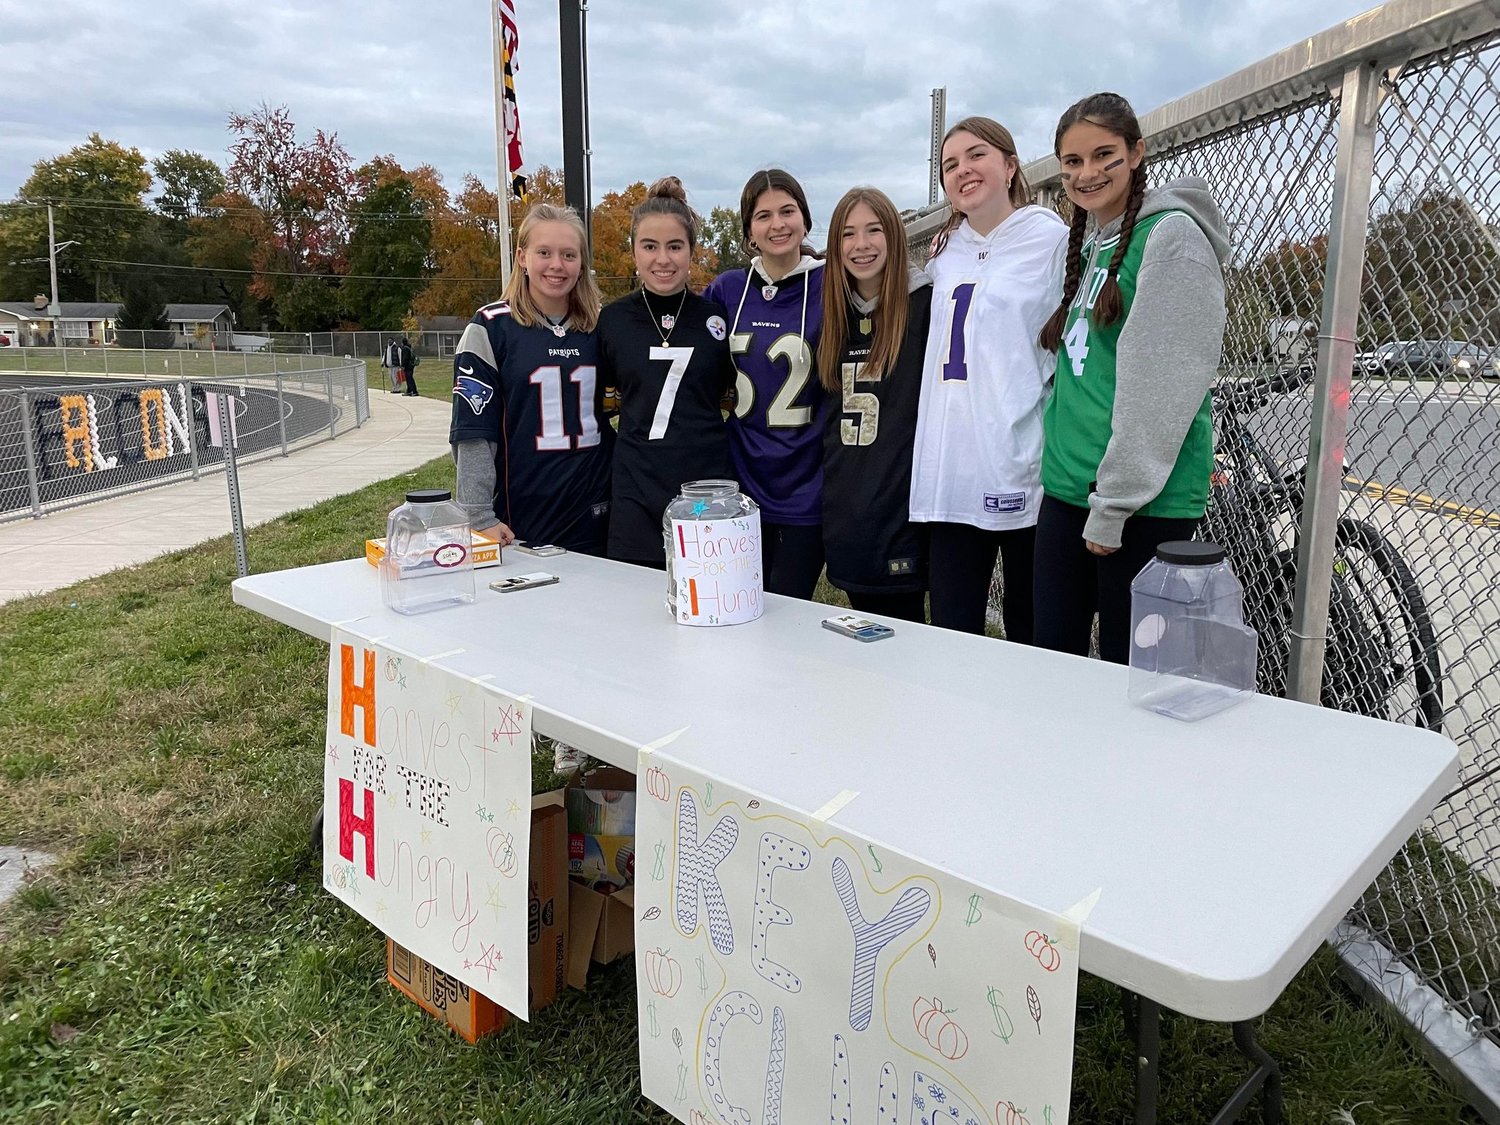 Josie Garrett, Jaidyn Jarrett, Natalie Frank, Jillian Kules, Tori Wright and Lily McCallister geared up to collect money for Harvest for the Hungry during a home football game in October.